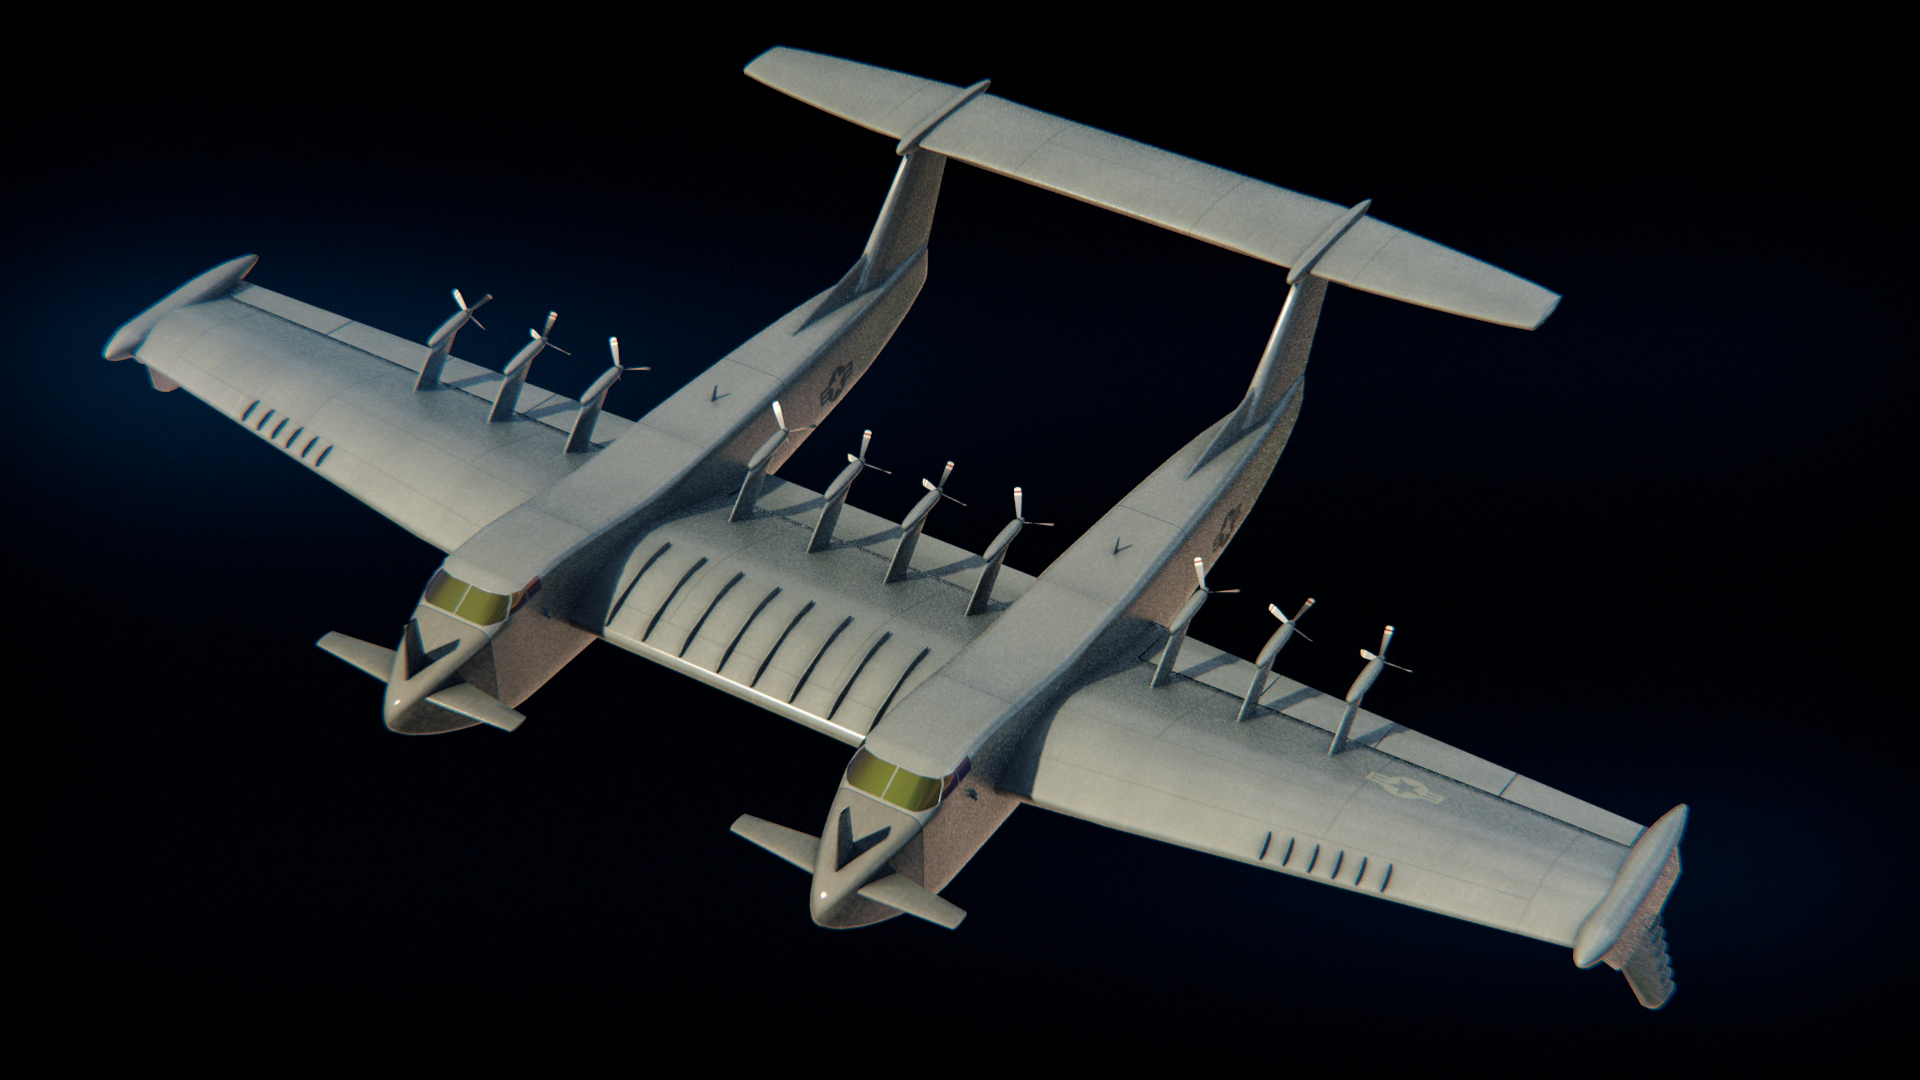 DARPA taps General Atomics for low-flying seaplane Liberty Lifter concept